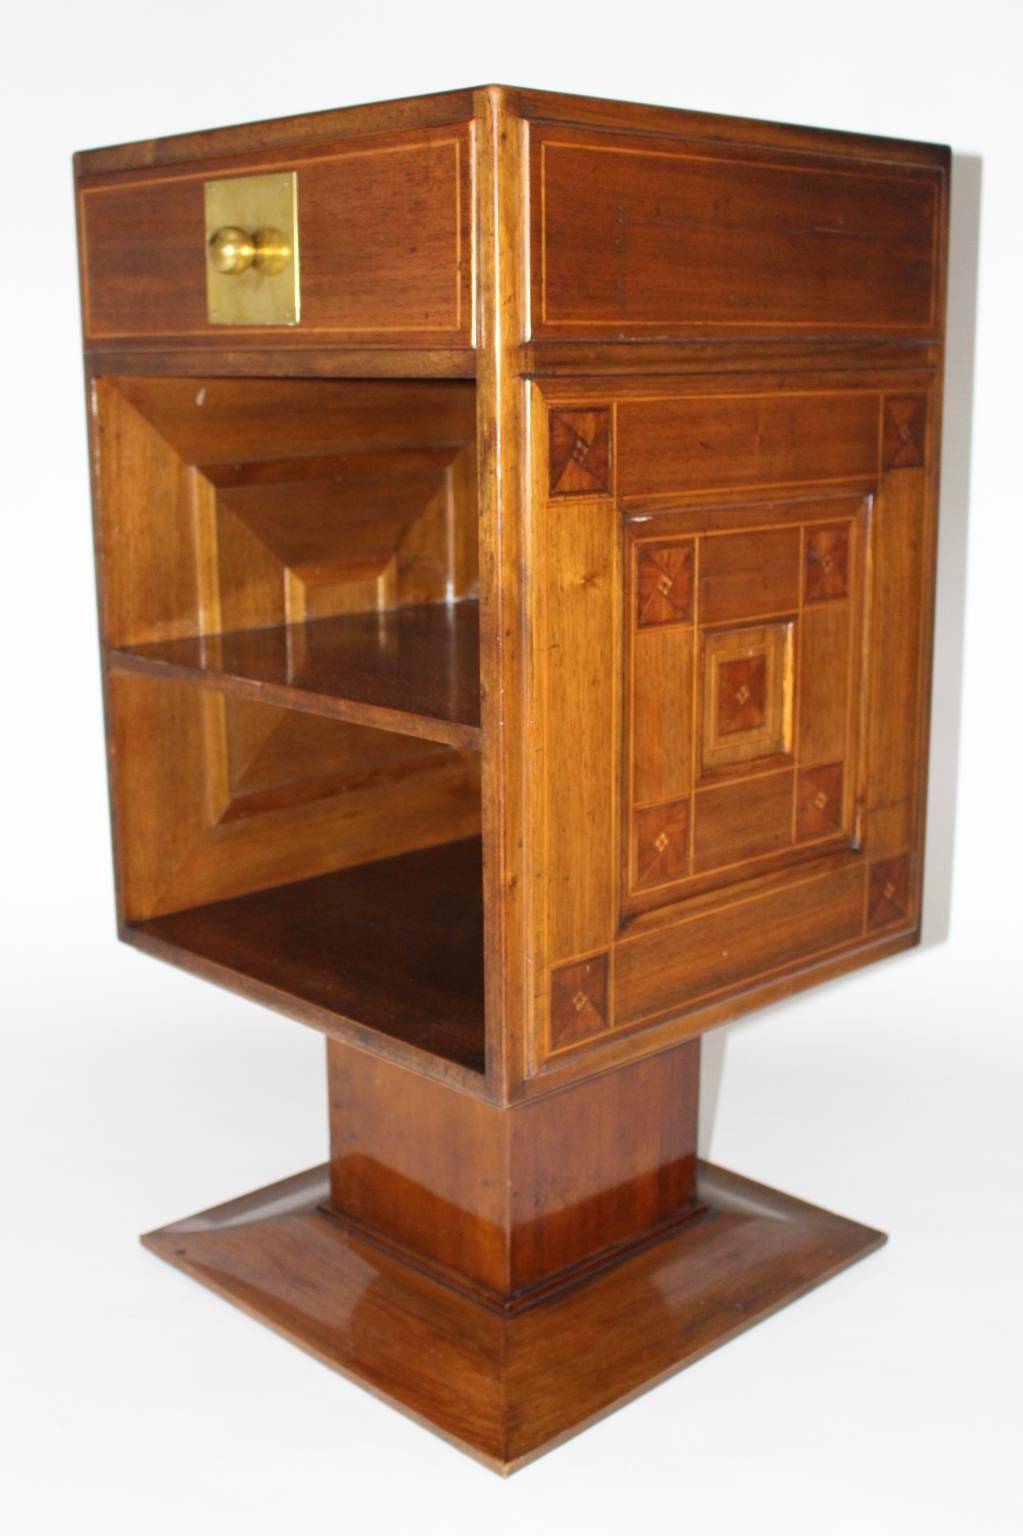 Vienna Secession Jugendstil side table or commodes or night stand designed by Robert Oerley Vienna circa 1905.
Very beautiful, important and high quality side table designed by Robert Oerley, Vienna circa 1905 and executed by Anton Pospischil,